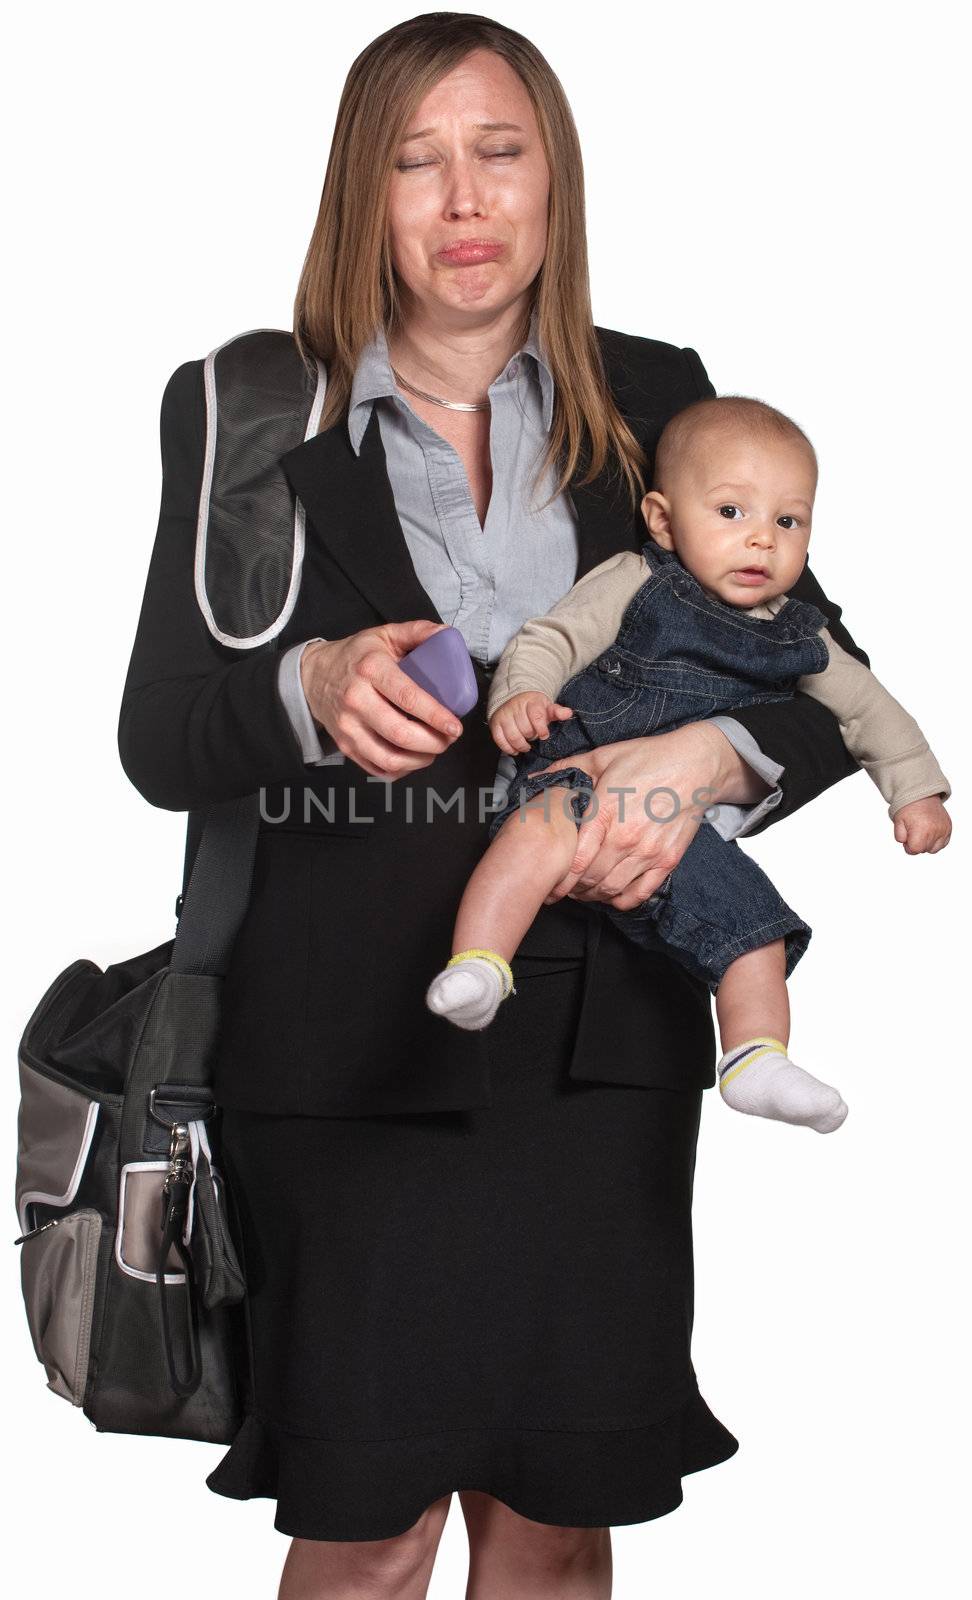 Crying professional lady with phone and baby in arms